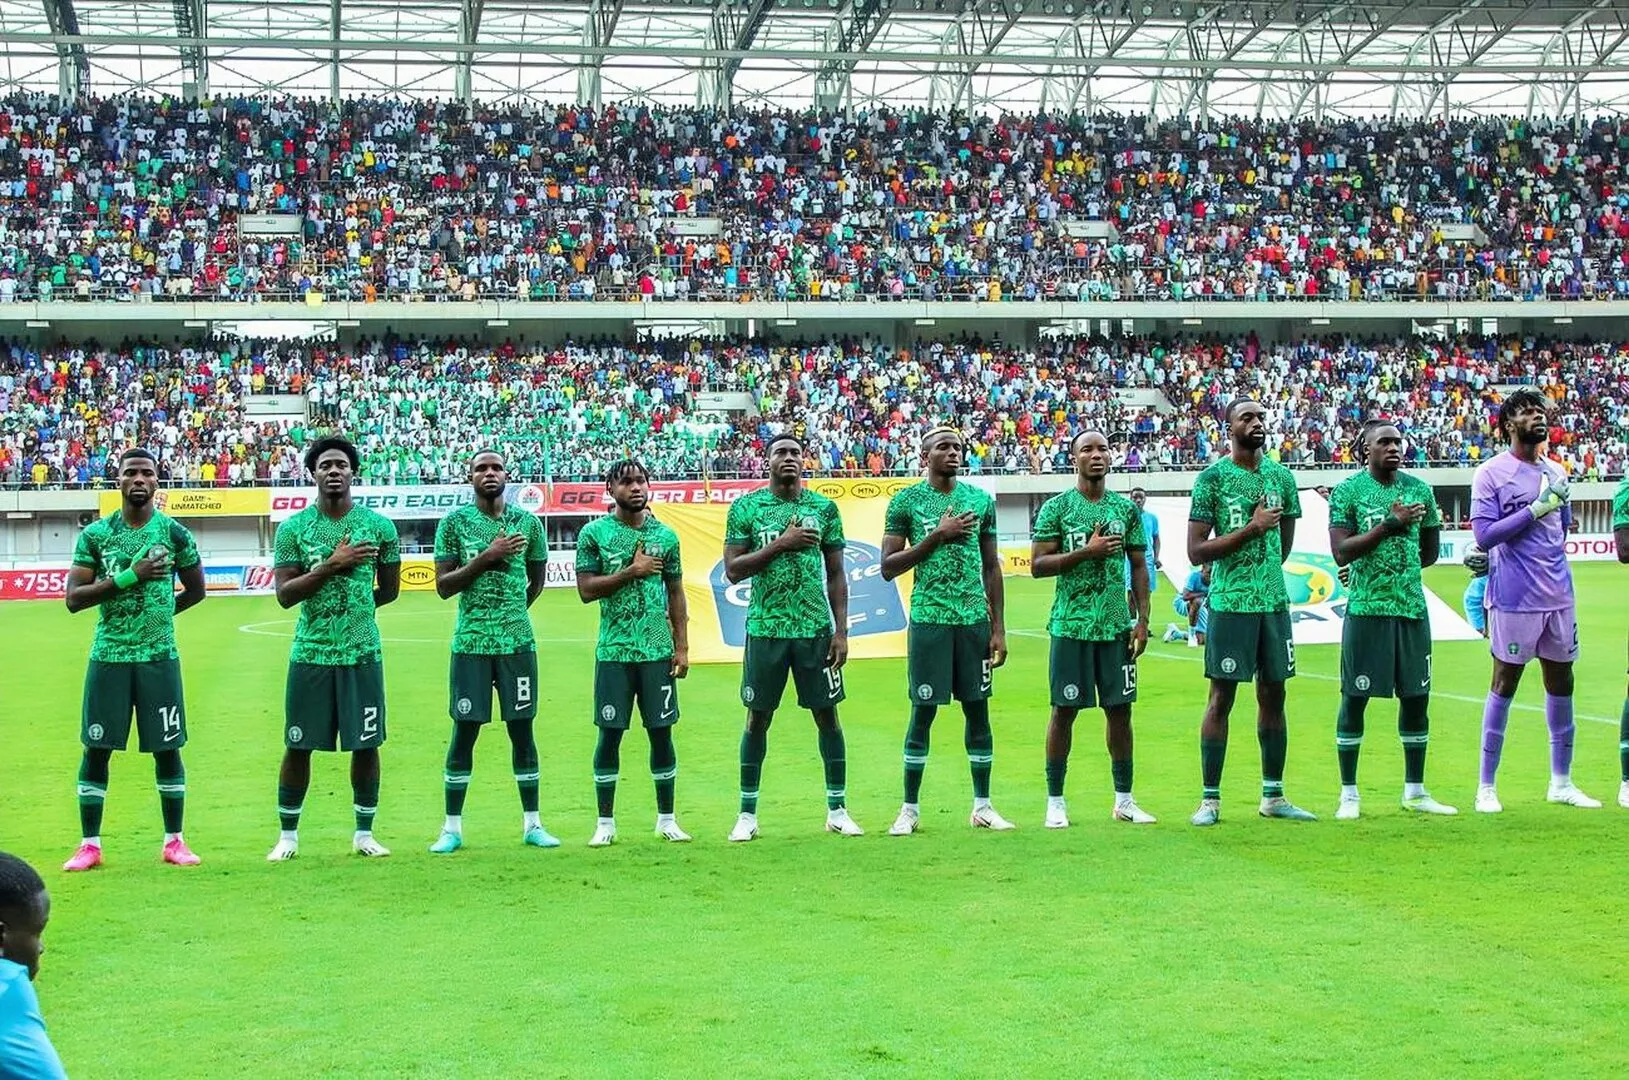 Nigeria climb to 42nd place in latest FIFA World Ranking